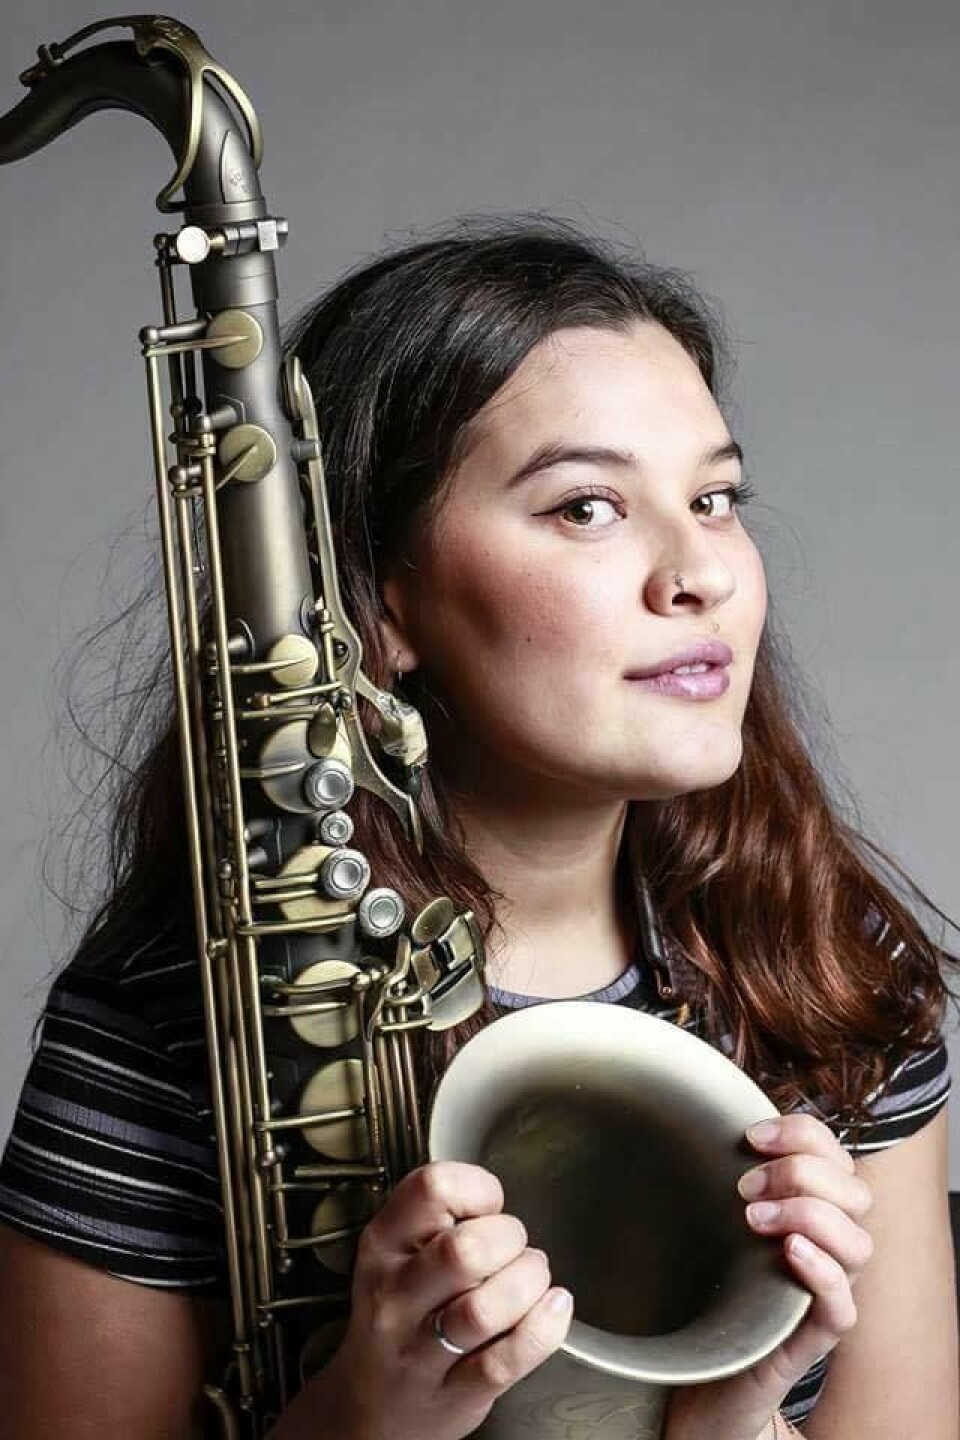 MAINTAINING A GOOD BALANCE: Mona Krogstad admits she may spend hours upon hours practicing her main instrument, the sax.